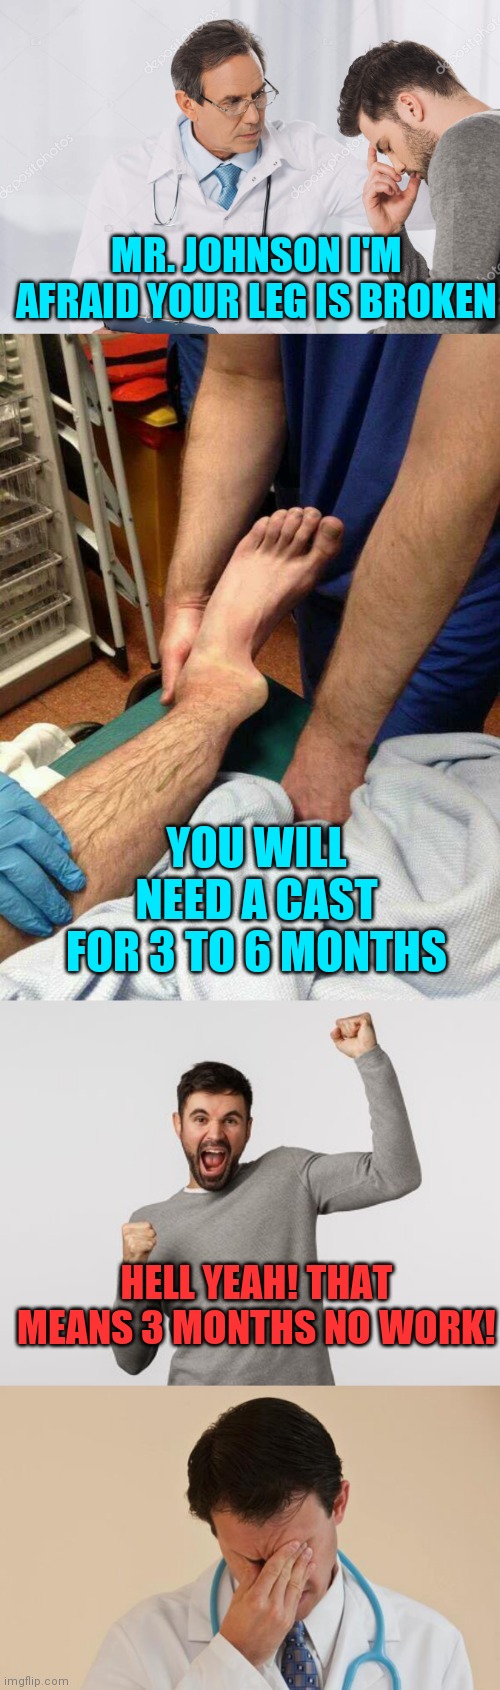 MY SAME THOUGHT | MR. JOHNSON I'M AFRAID YOUR LEG IS BROKEN; YOU WILL NEED A CAST FOR 3 TO 6 MONTHS; HELL YEAH! THAT MEANS 3 MONTHS NO WORK! | image tagged in work,broken leg,doctor | made w/ Imgflip meme maker